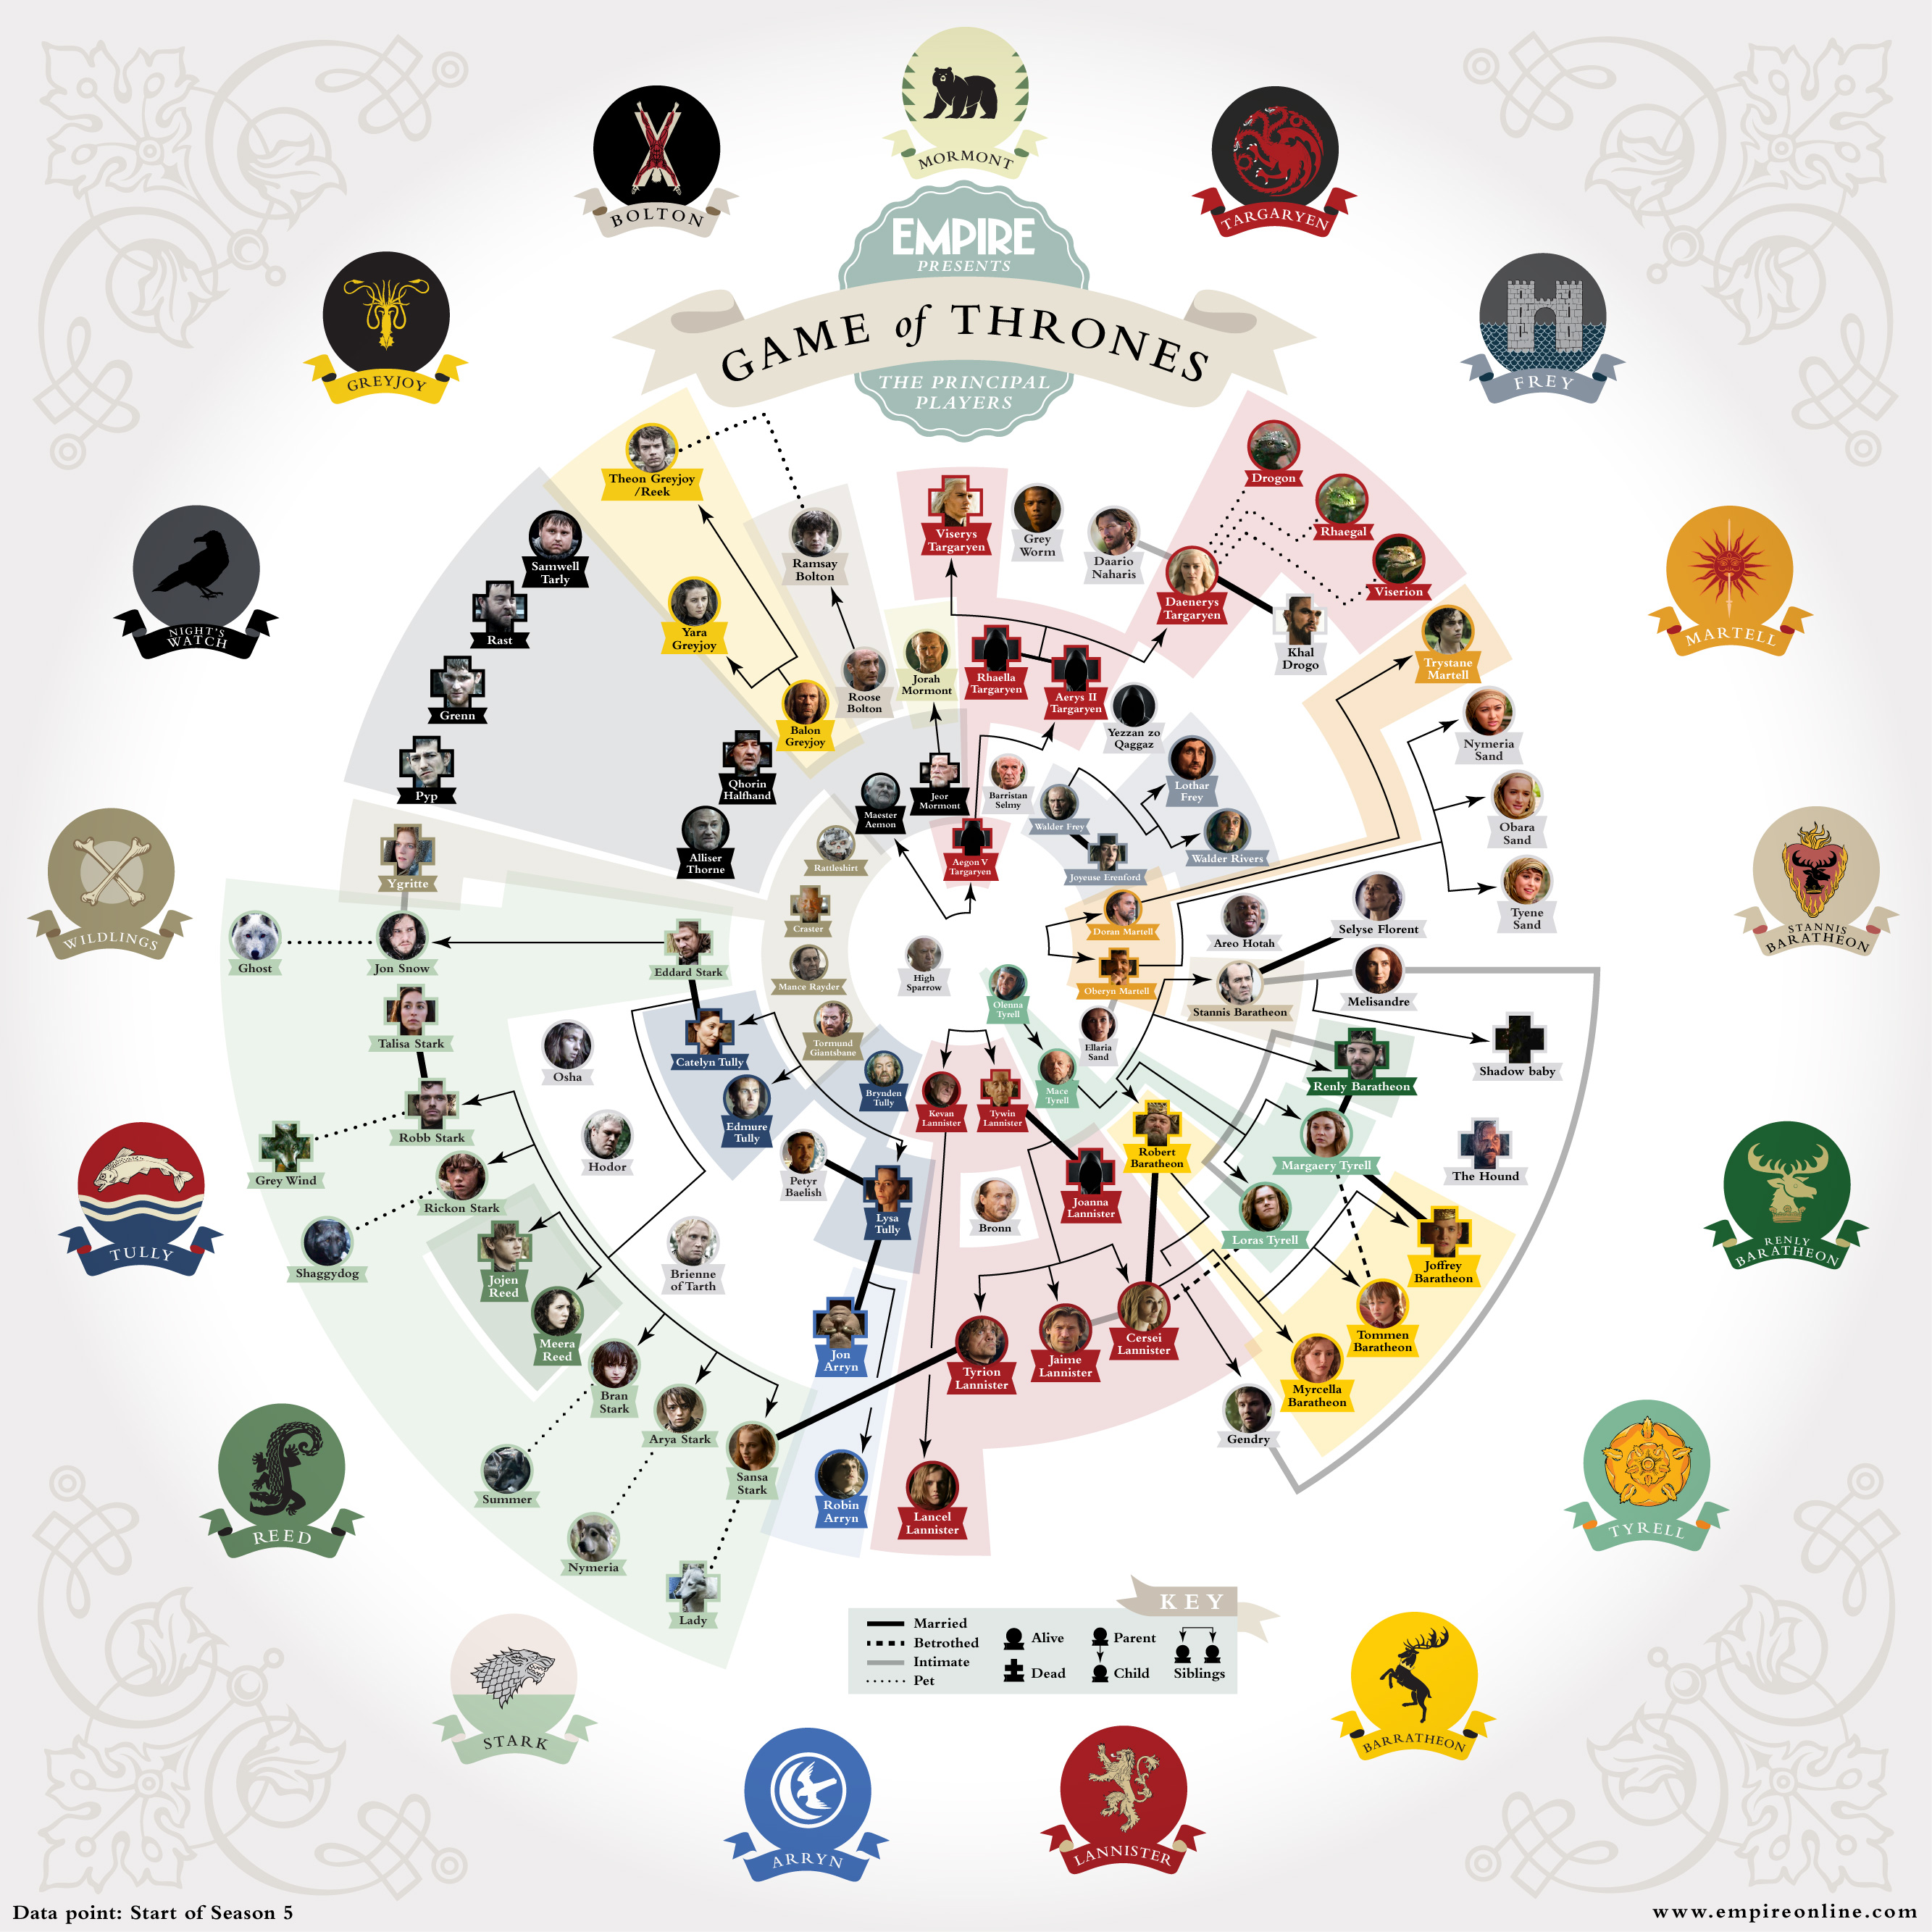 Game of Thrones Infographic